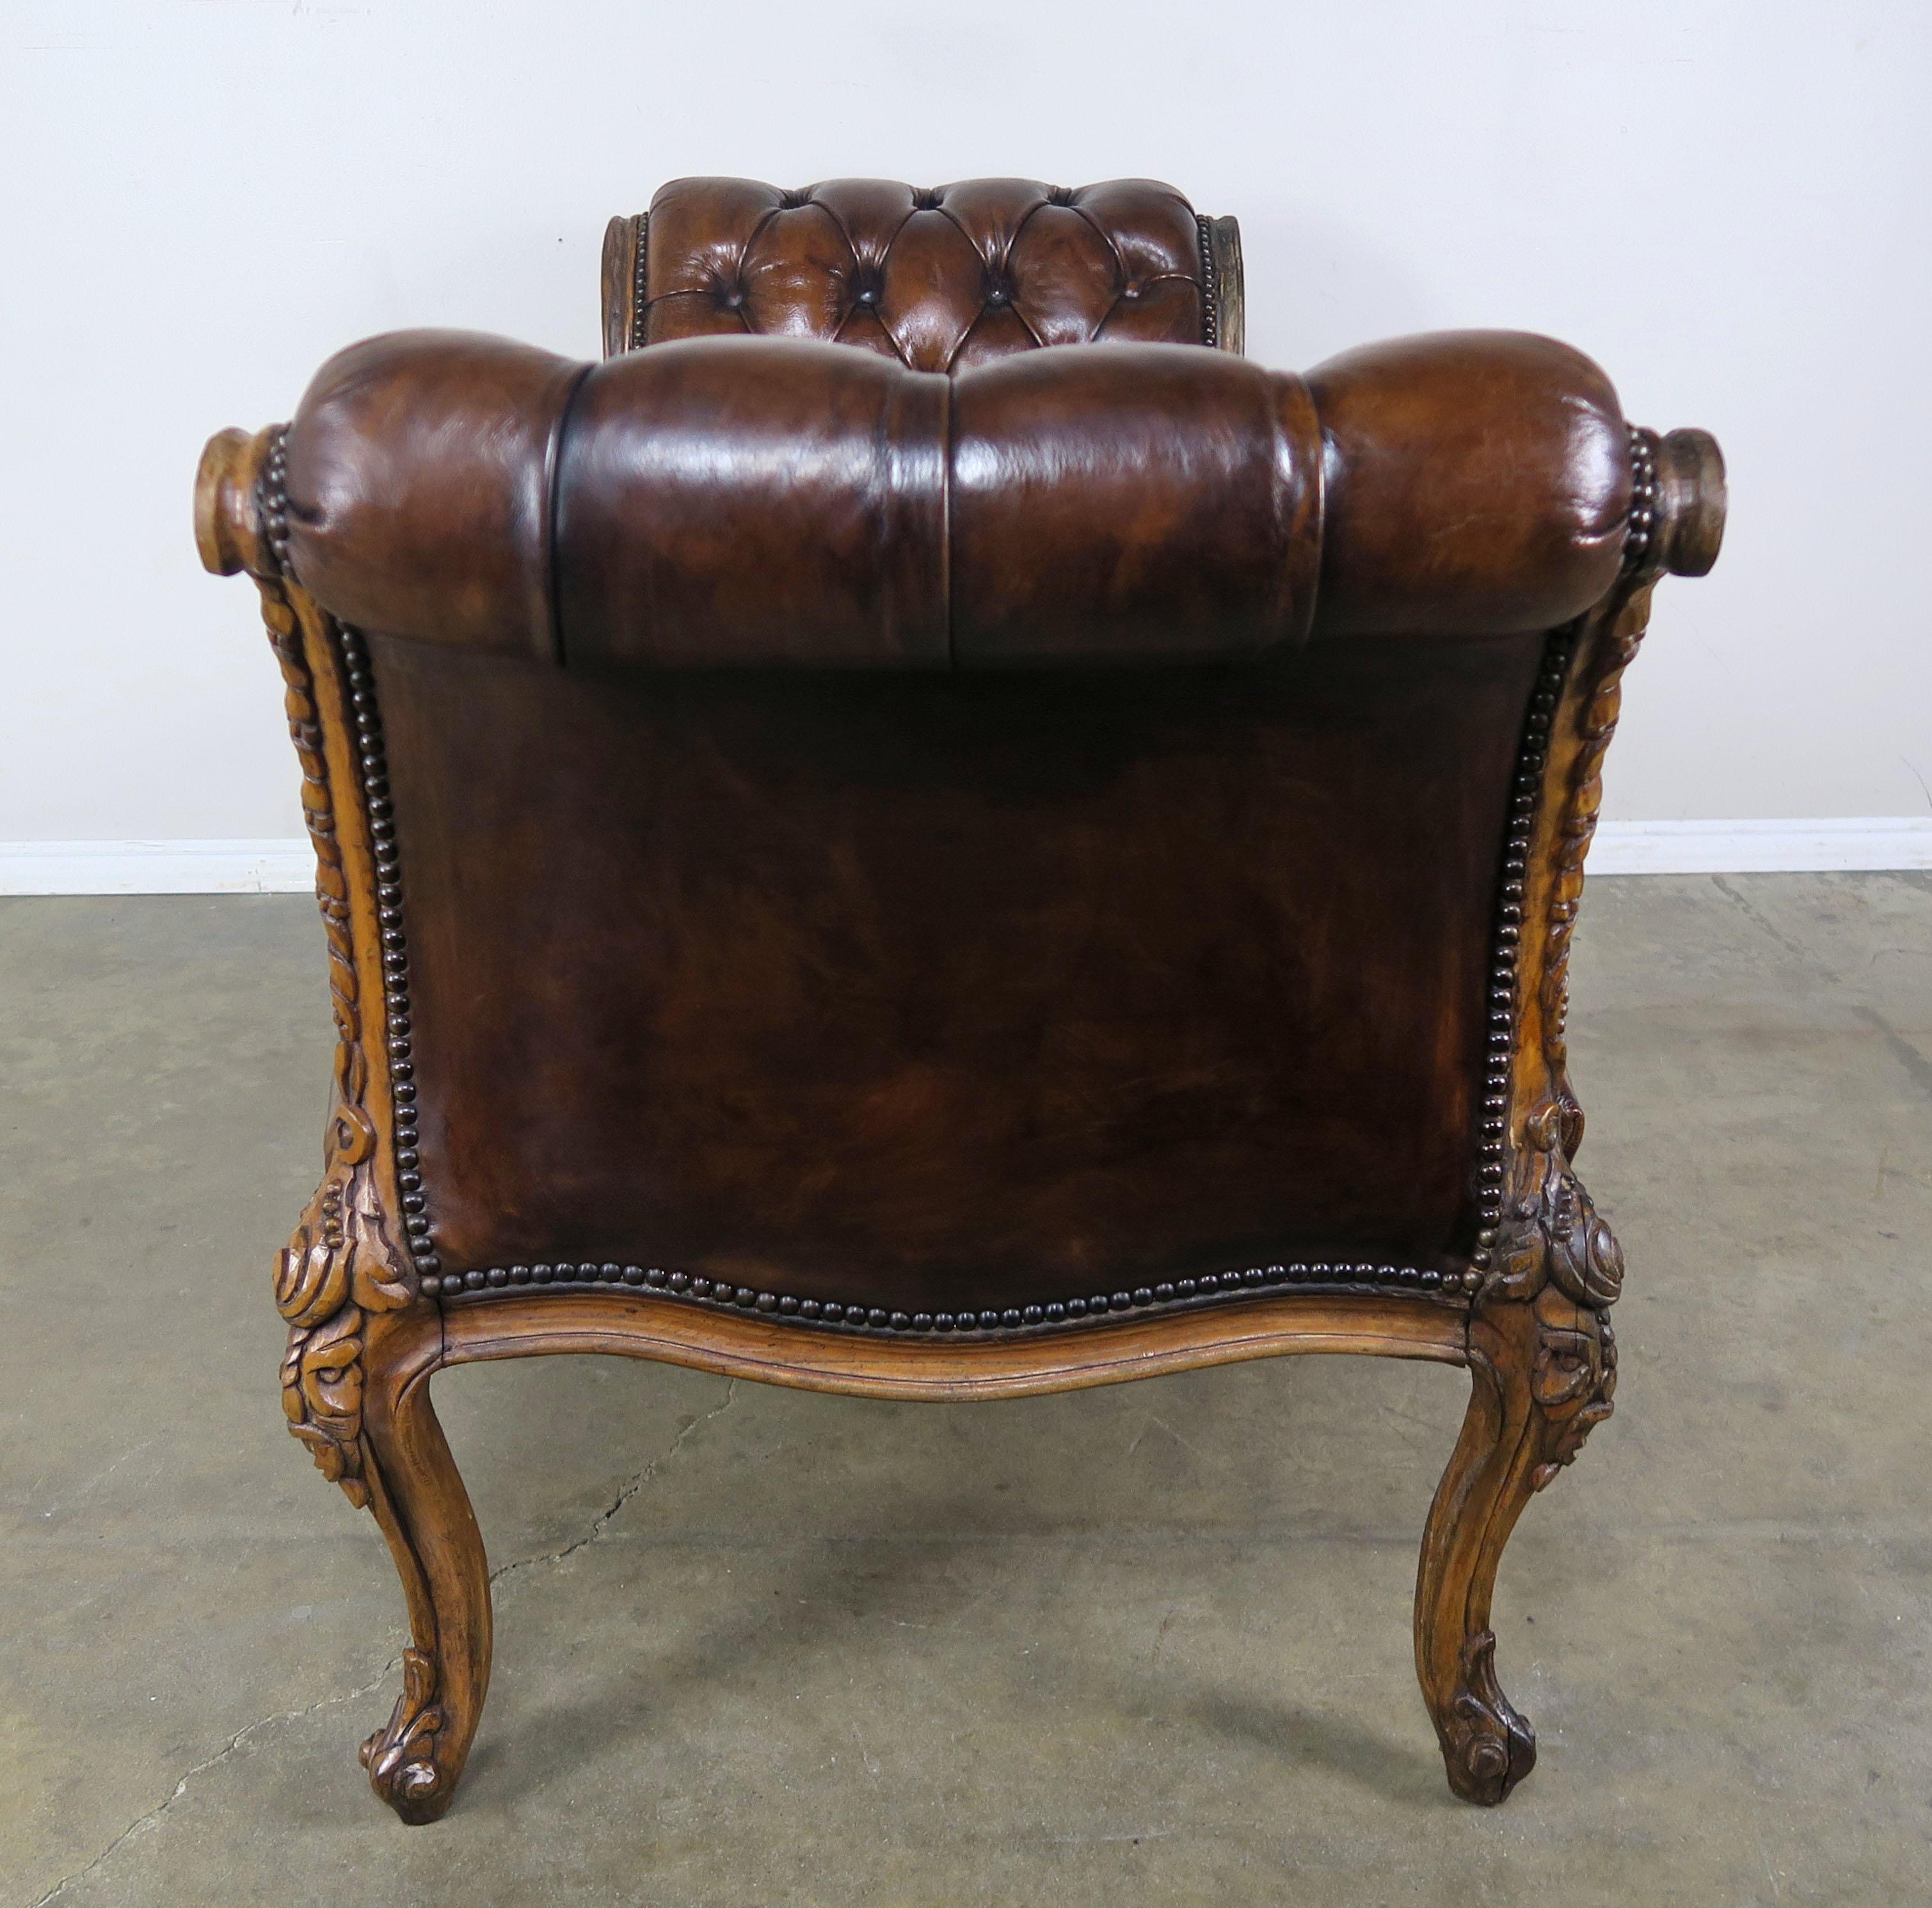 19th Century French Leather Six-Legged Tufted Bench 4